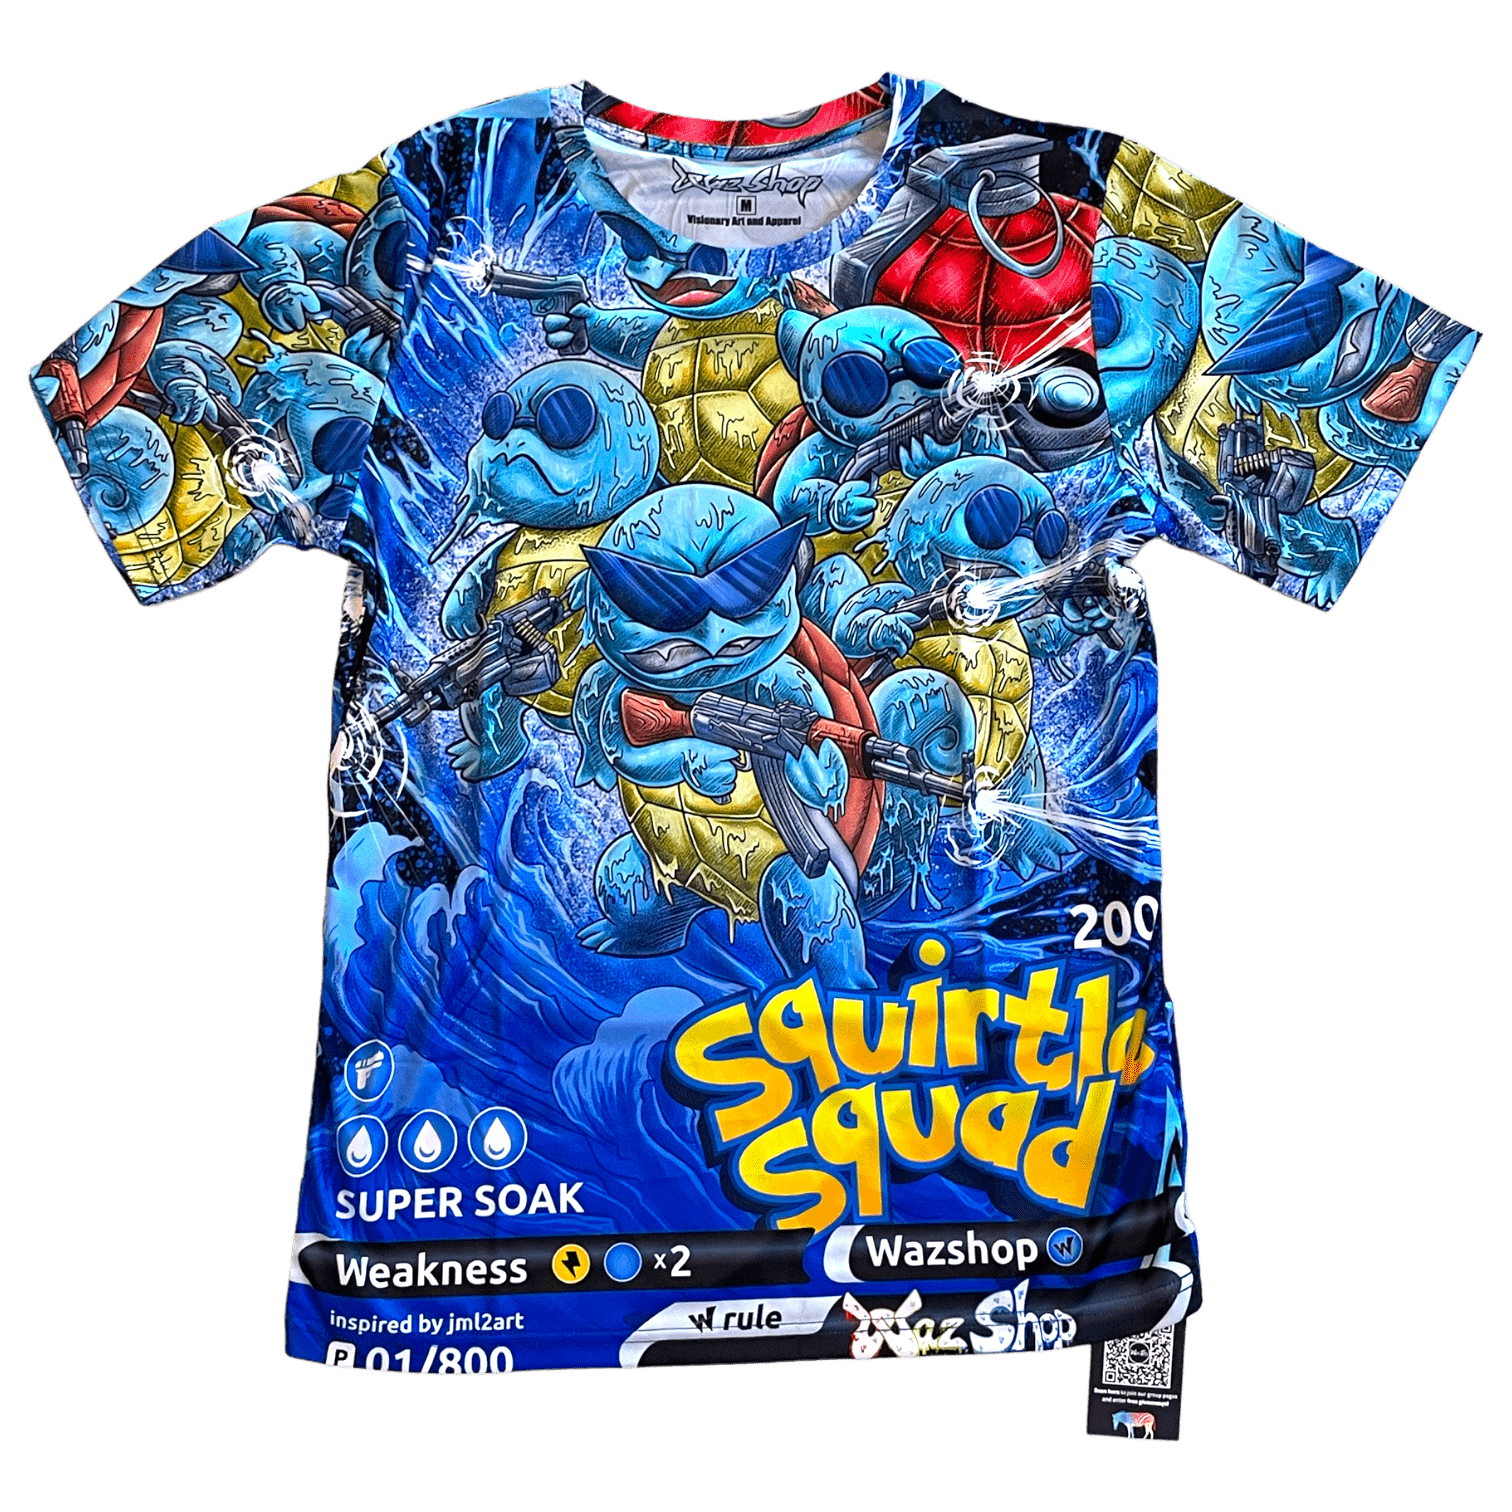 Squirtle Squad Shirt